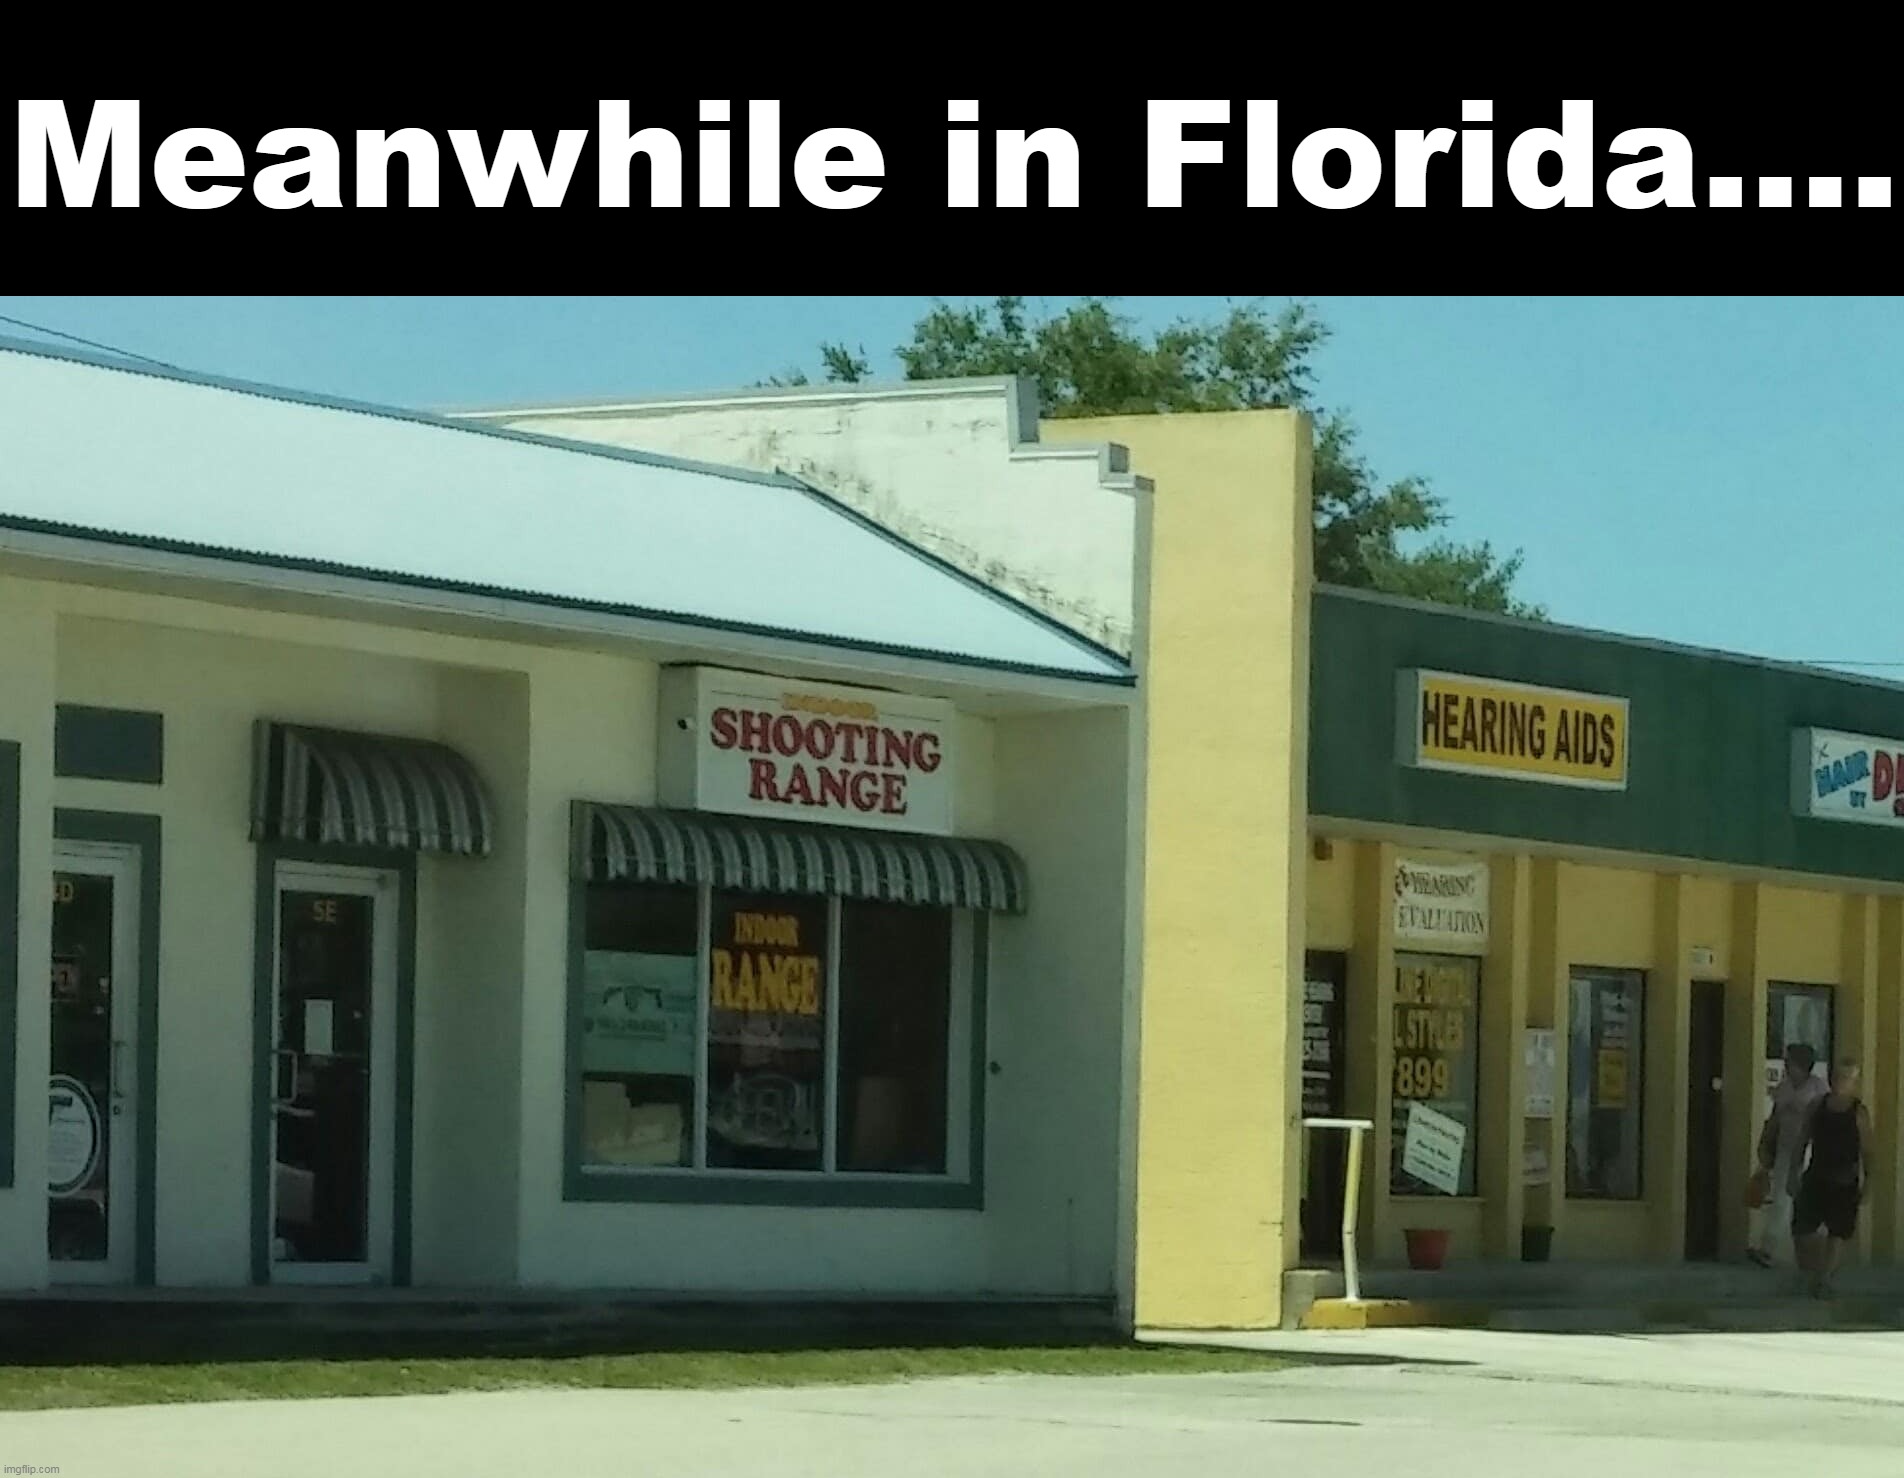 What an Ironic Combination! | Meanwhile in Florida.... | image tagged in meme,memes,humor,funny,signs | made w/ Imgflip meme maker